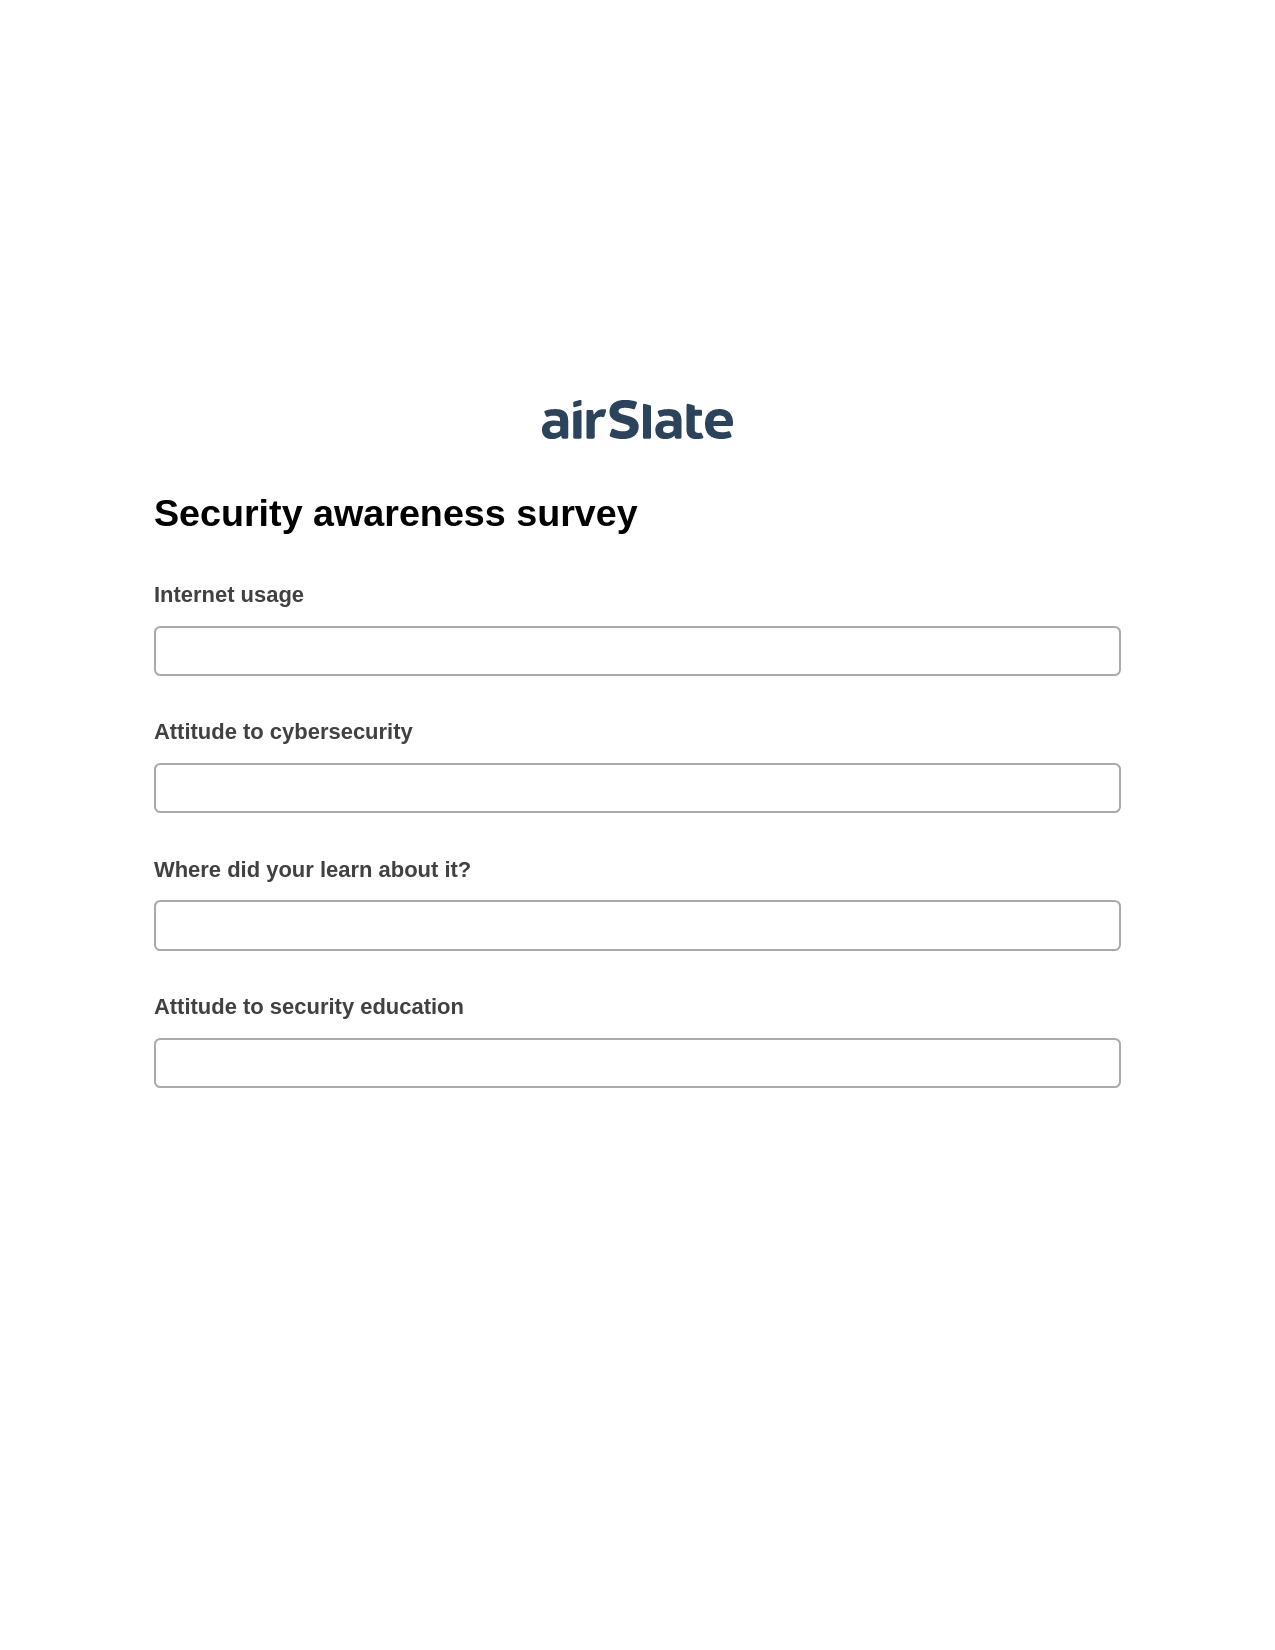 Security awareness survey Pre-fill from Google Sheet Dropdown Options Bot, Create QuickBooks invoice Bot, Export to Salesforce Bot